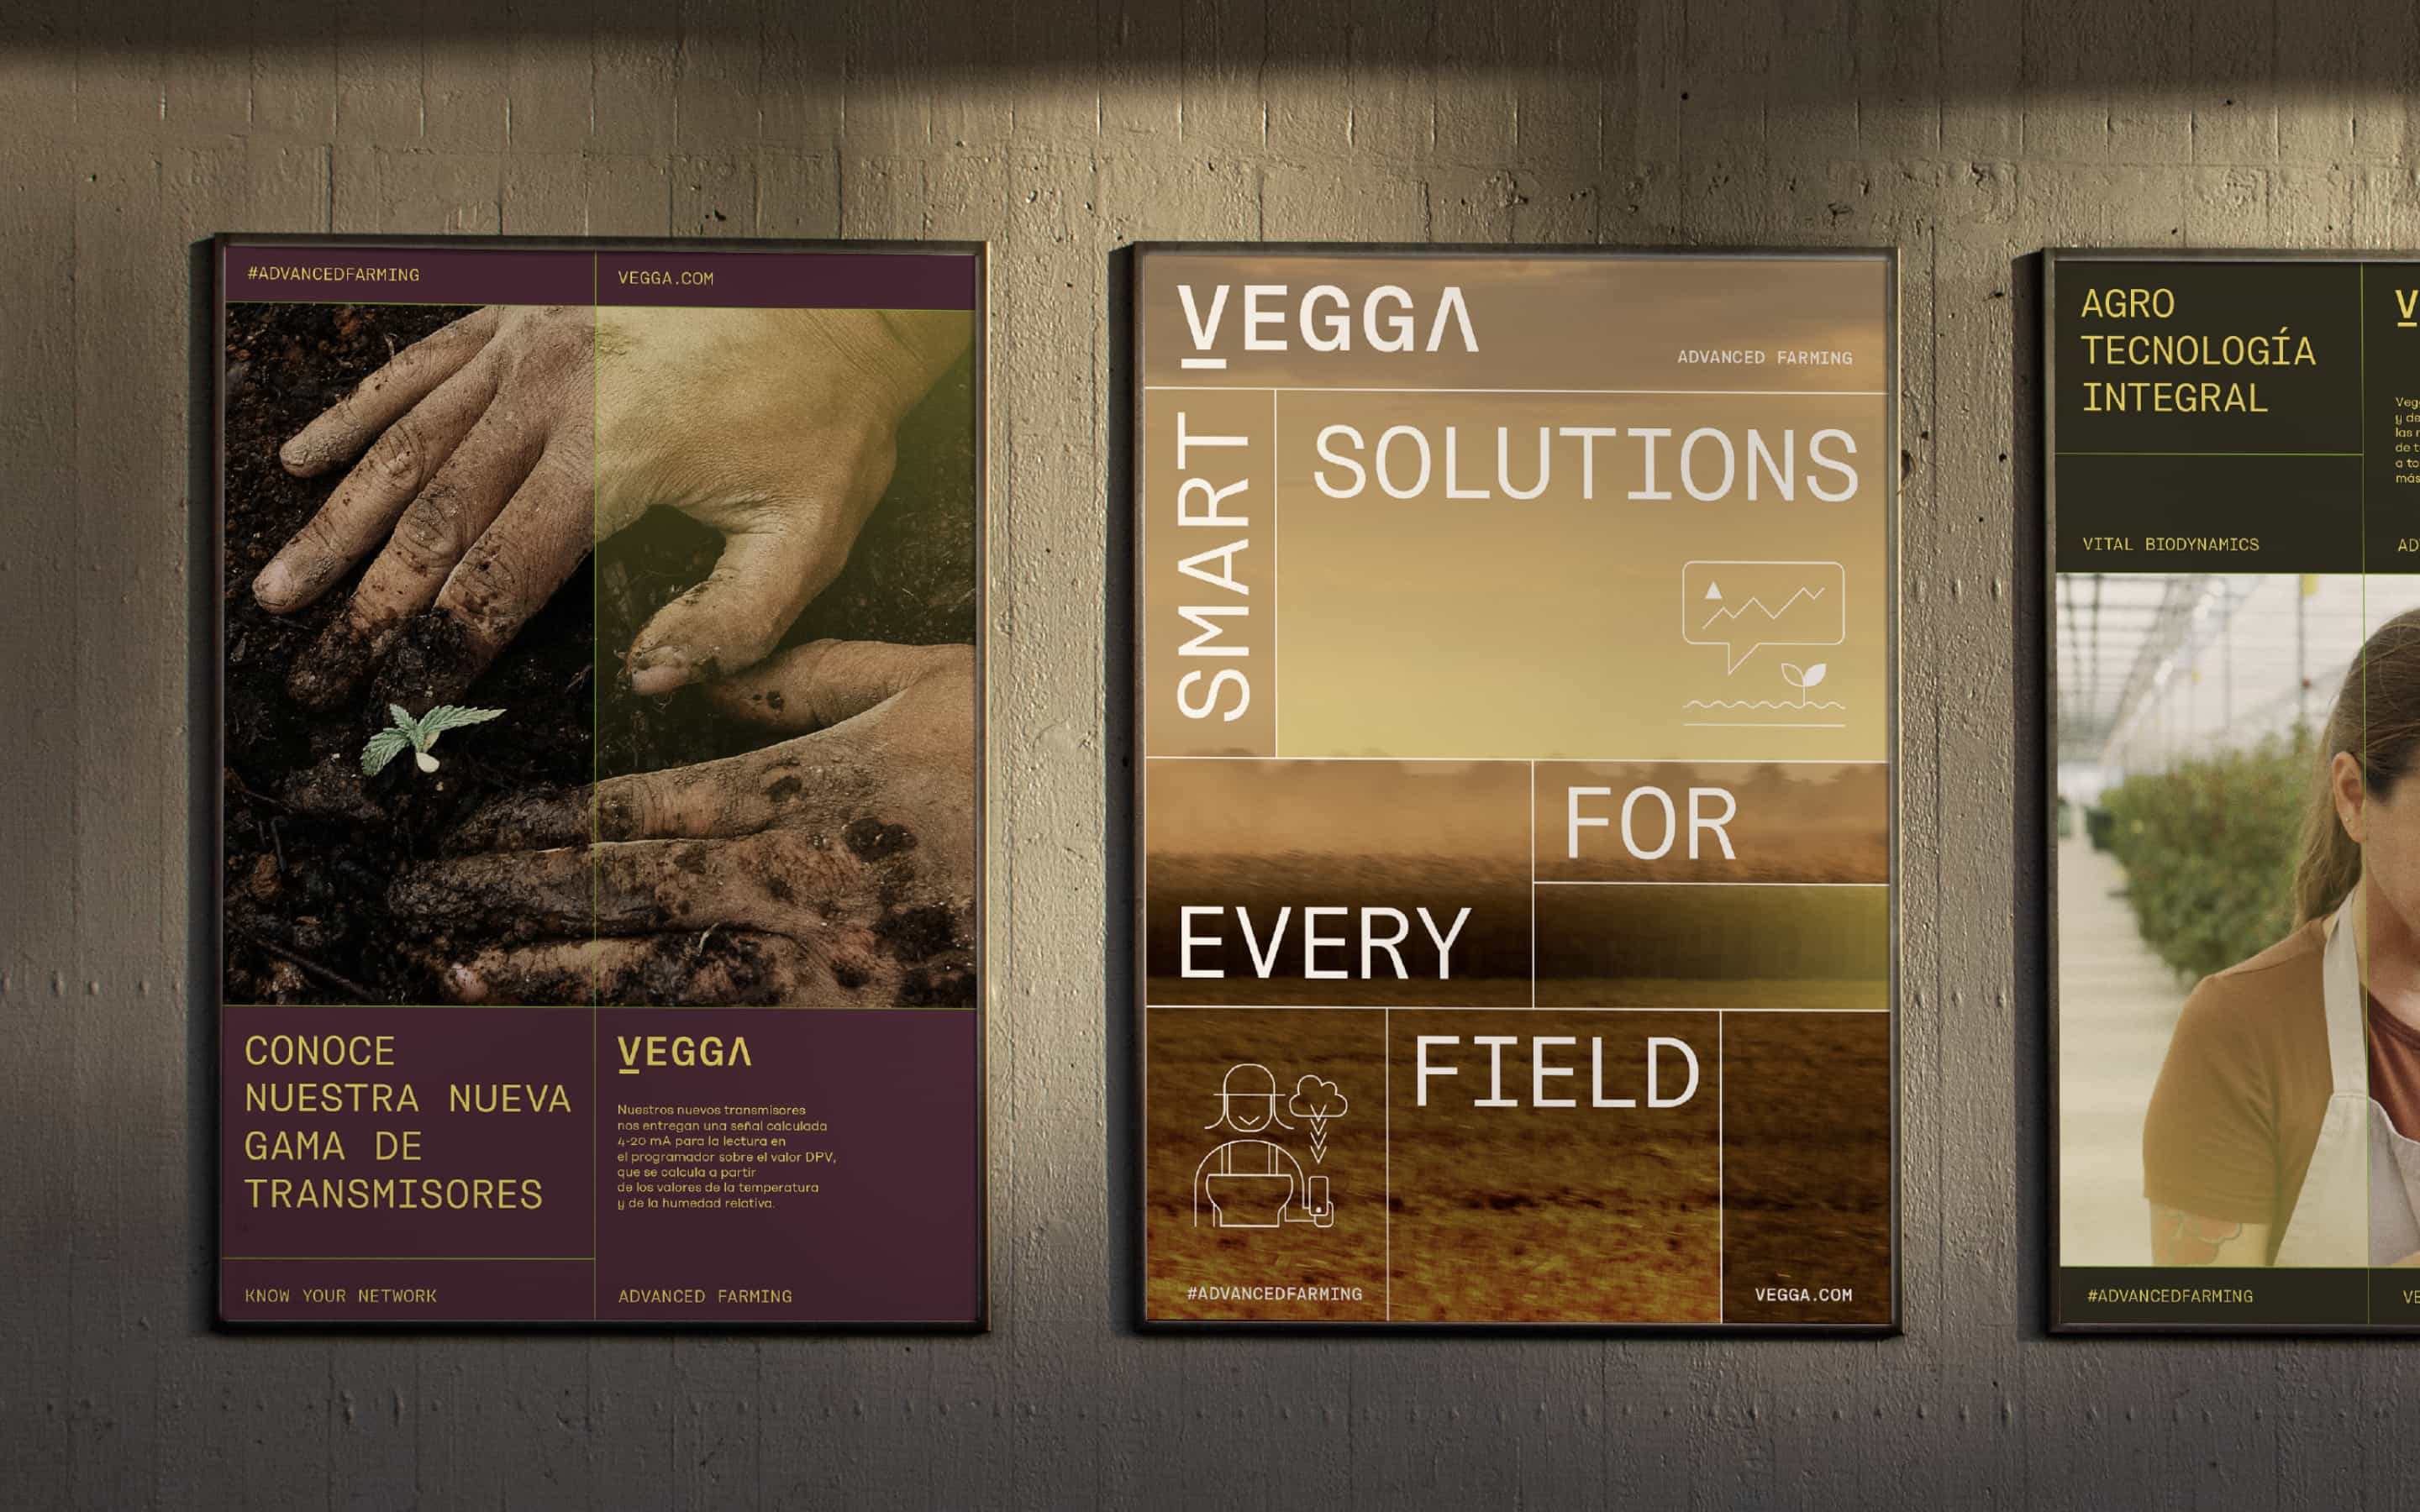 We defined the strategy and visual identity of Vegga, a brand created by MatHolding and Sistemes Electrònics Progrés. This digital platform for "Smart Farming" was born to revolutionize agriculture in an efficient and sustainable way.
